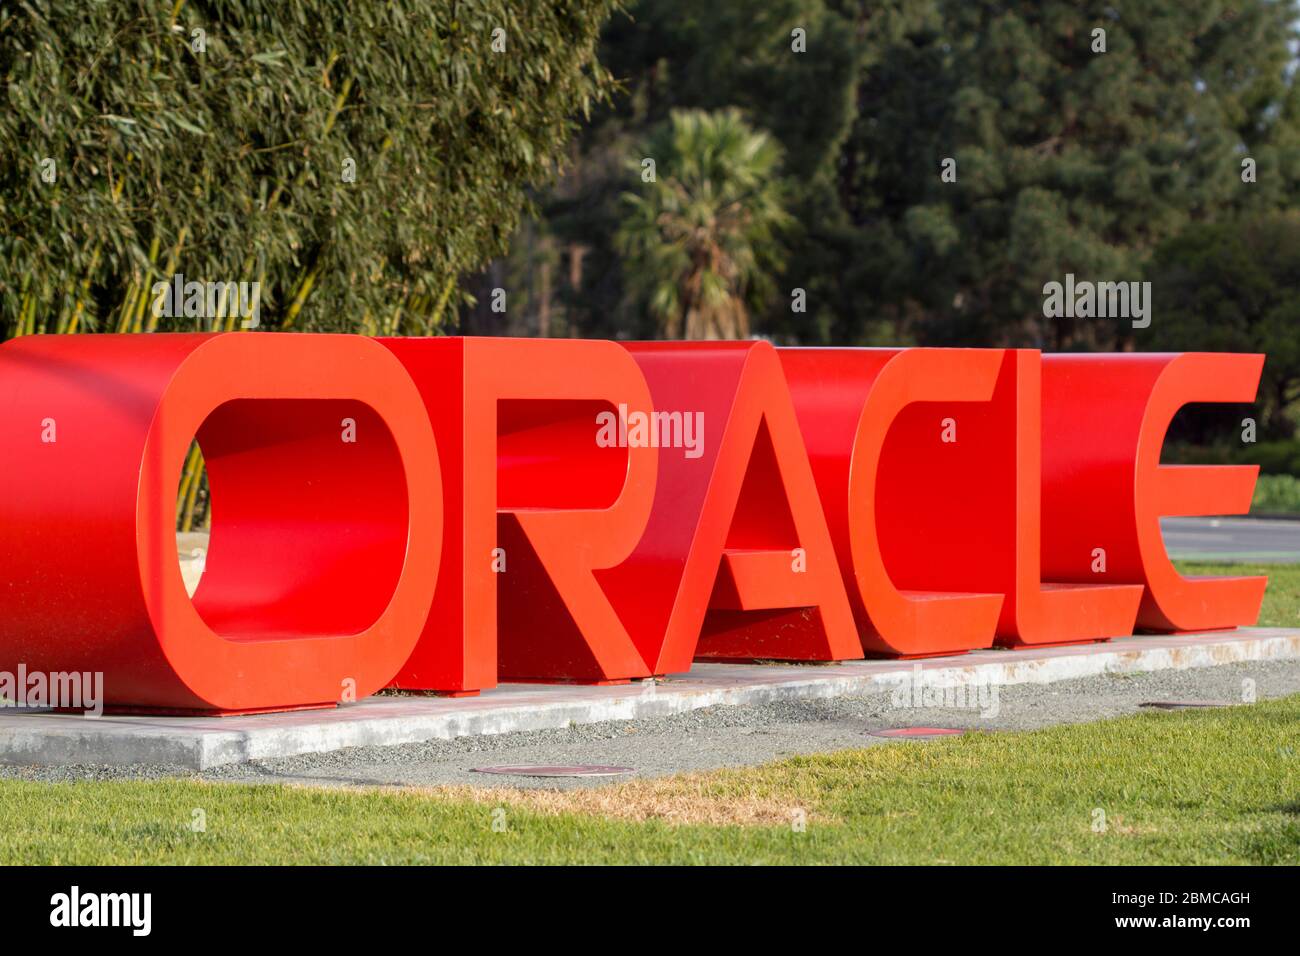 The Oracle sign is seen at the entrance to Oracle Corporation Headquarters in Redwood Shores, California, on Feb 16, 2020. Stock Photo